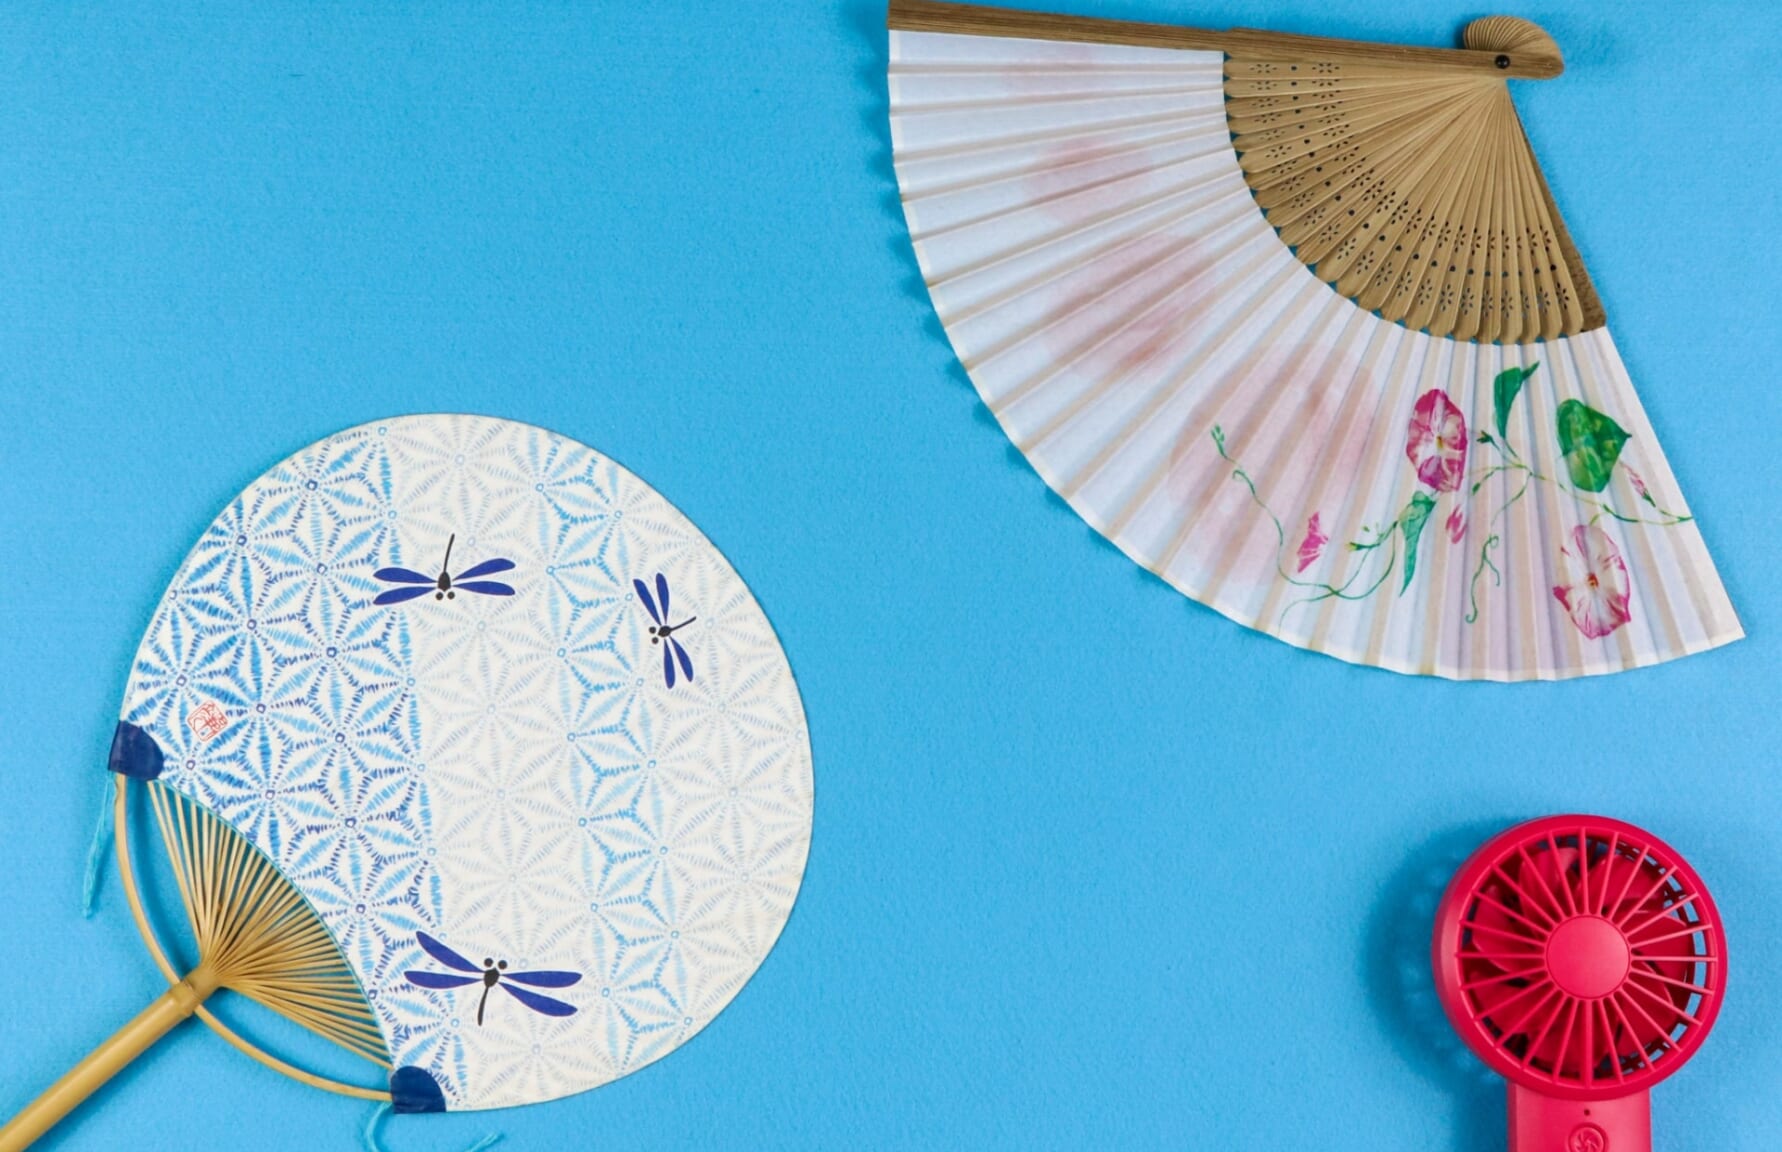 18 Beautiful Handcrafted Japanese Gifts To Take Home